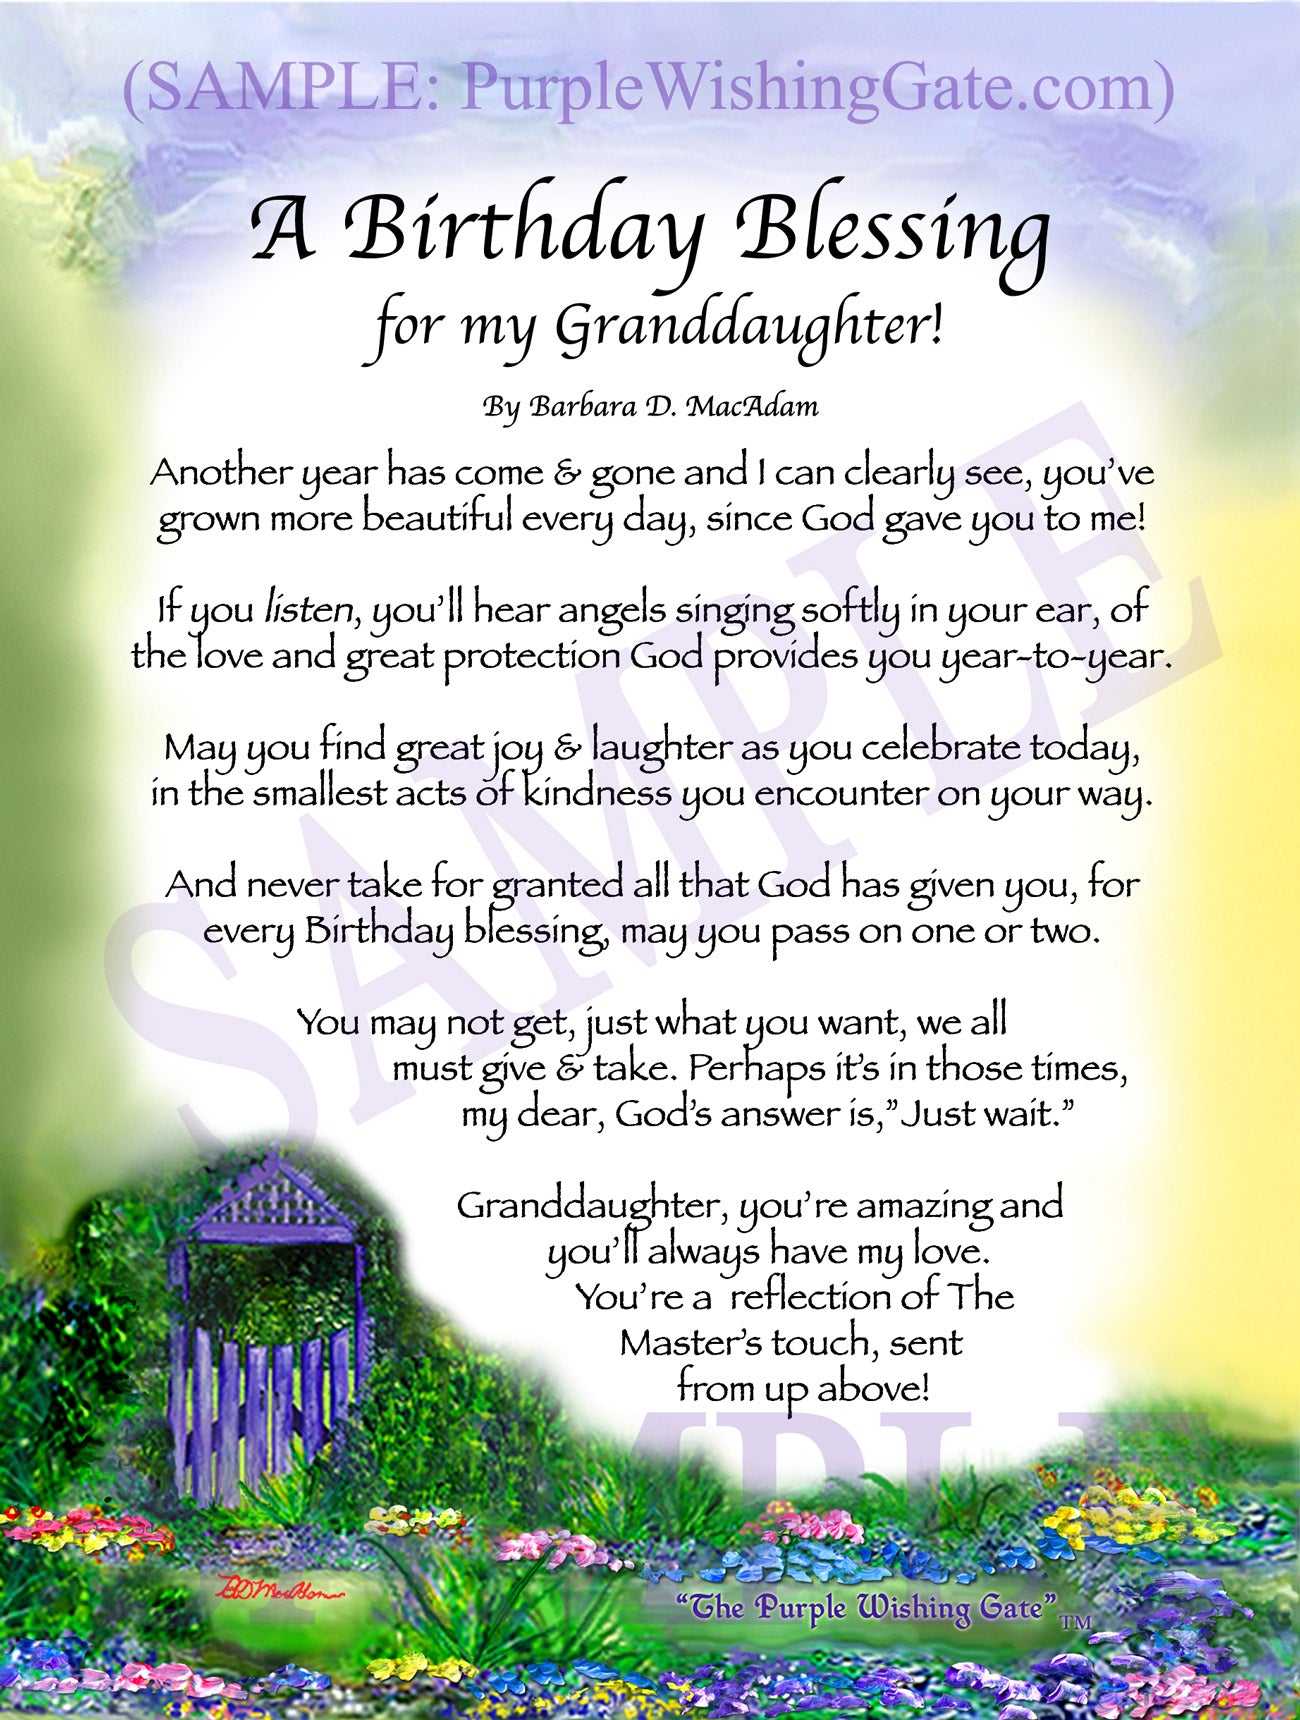 
              
        		A Birthday Blessing for my Granddaughter! - Birthday Gift - PurpleWishingGate.com
        		
        	